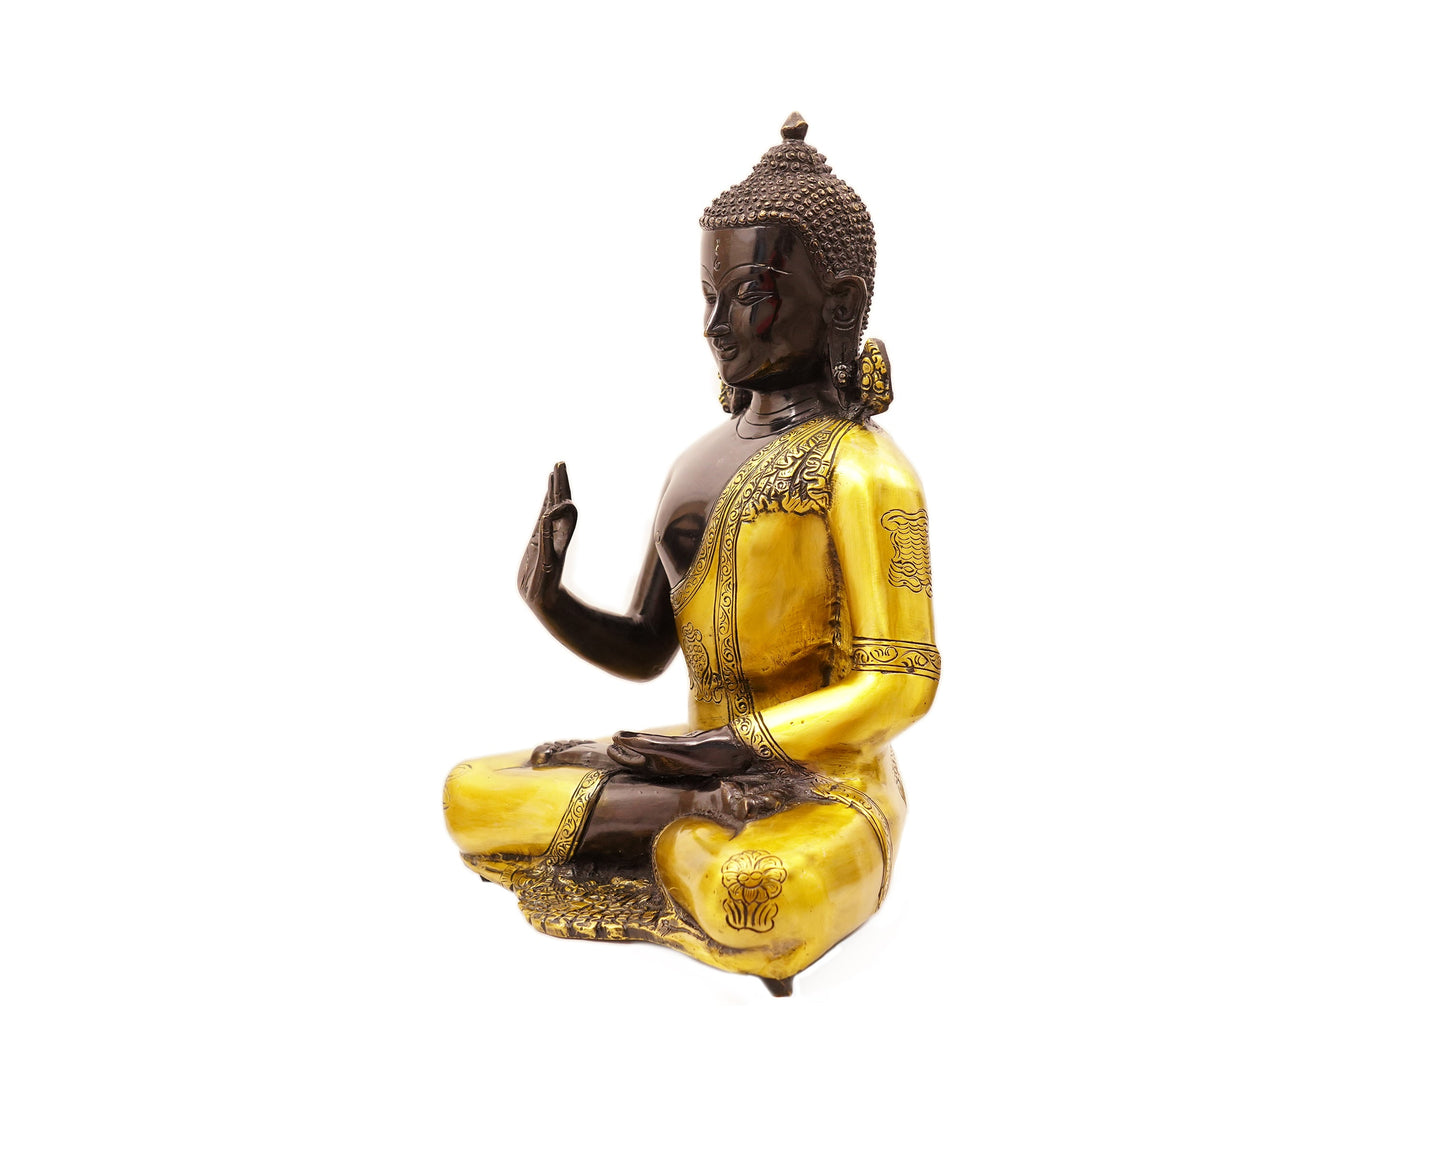 Lord Buddha Brass Statue - Blessing Buddha Idol for Garden, Puja, Home Mandirs, Gifts by Pooja Bazar 12 x 6.5  x 10 In